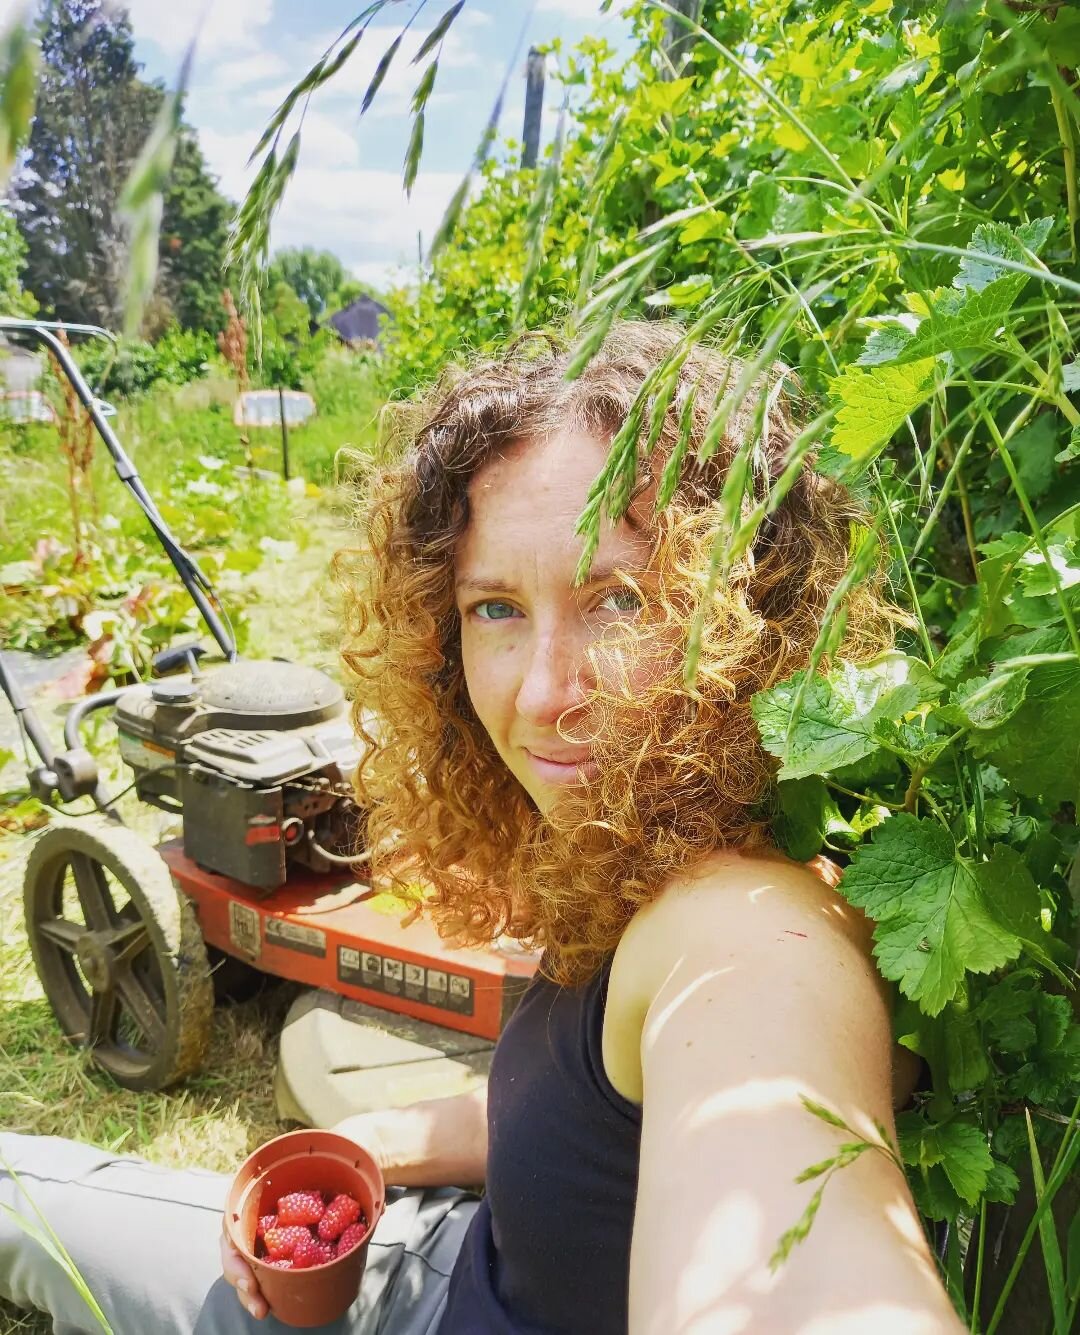 Safe to say my little field isn't looking as pretty as I hoped this year. I got off to a great start- then bam! My business is growing as fast as my jostaberry bushes &amp; I'm finding it hard to keep up! Not a bad problem to have really 😁

A moment